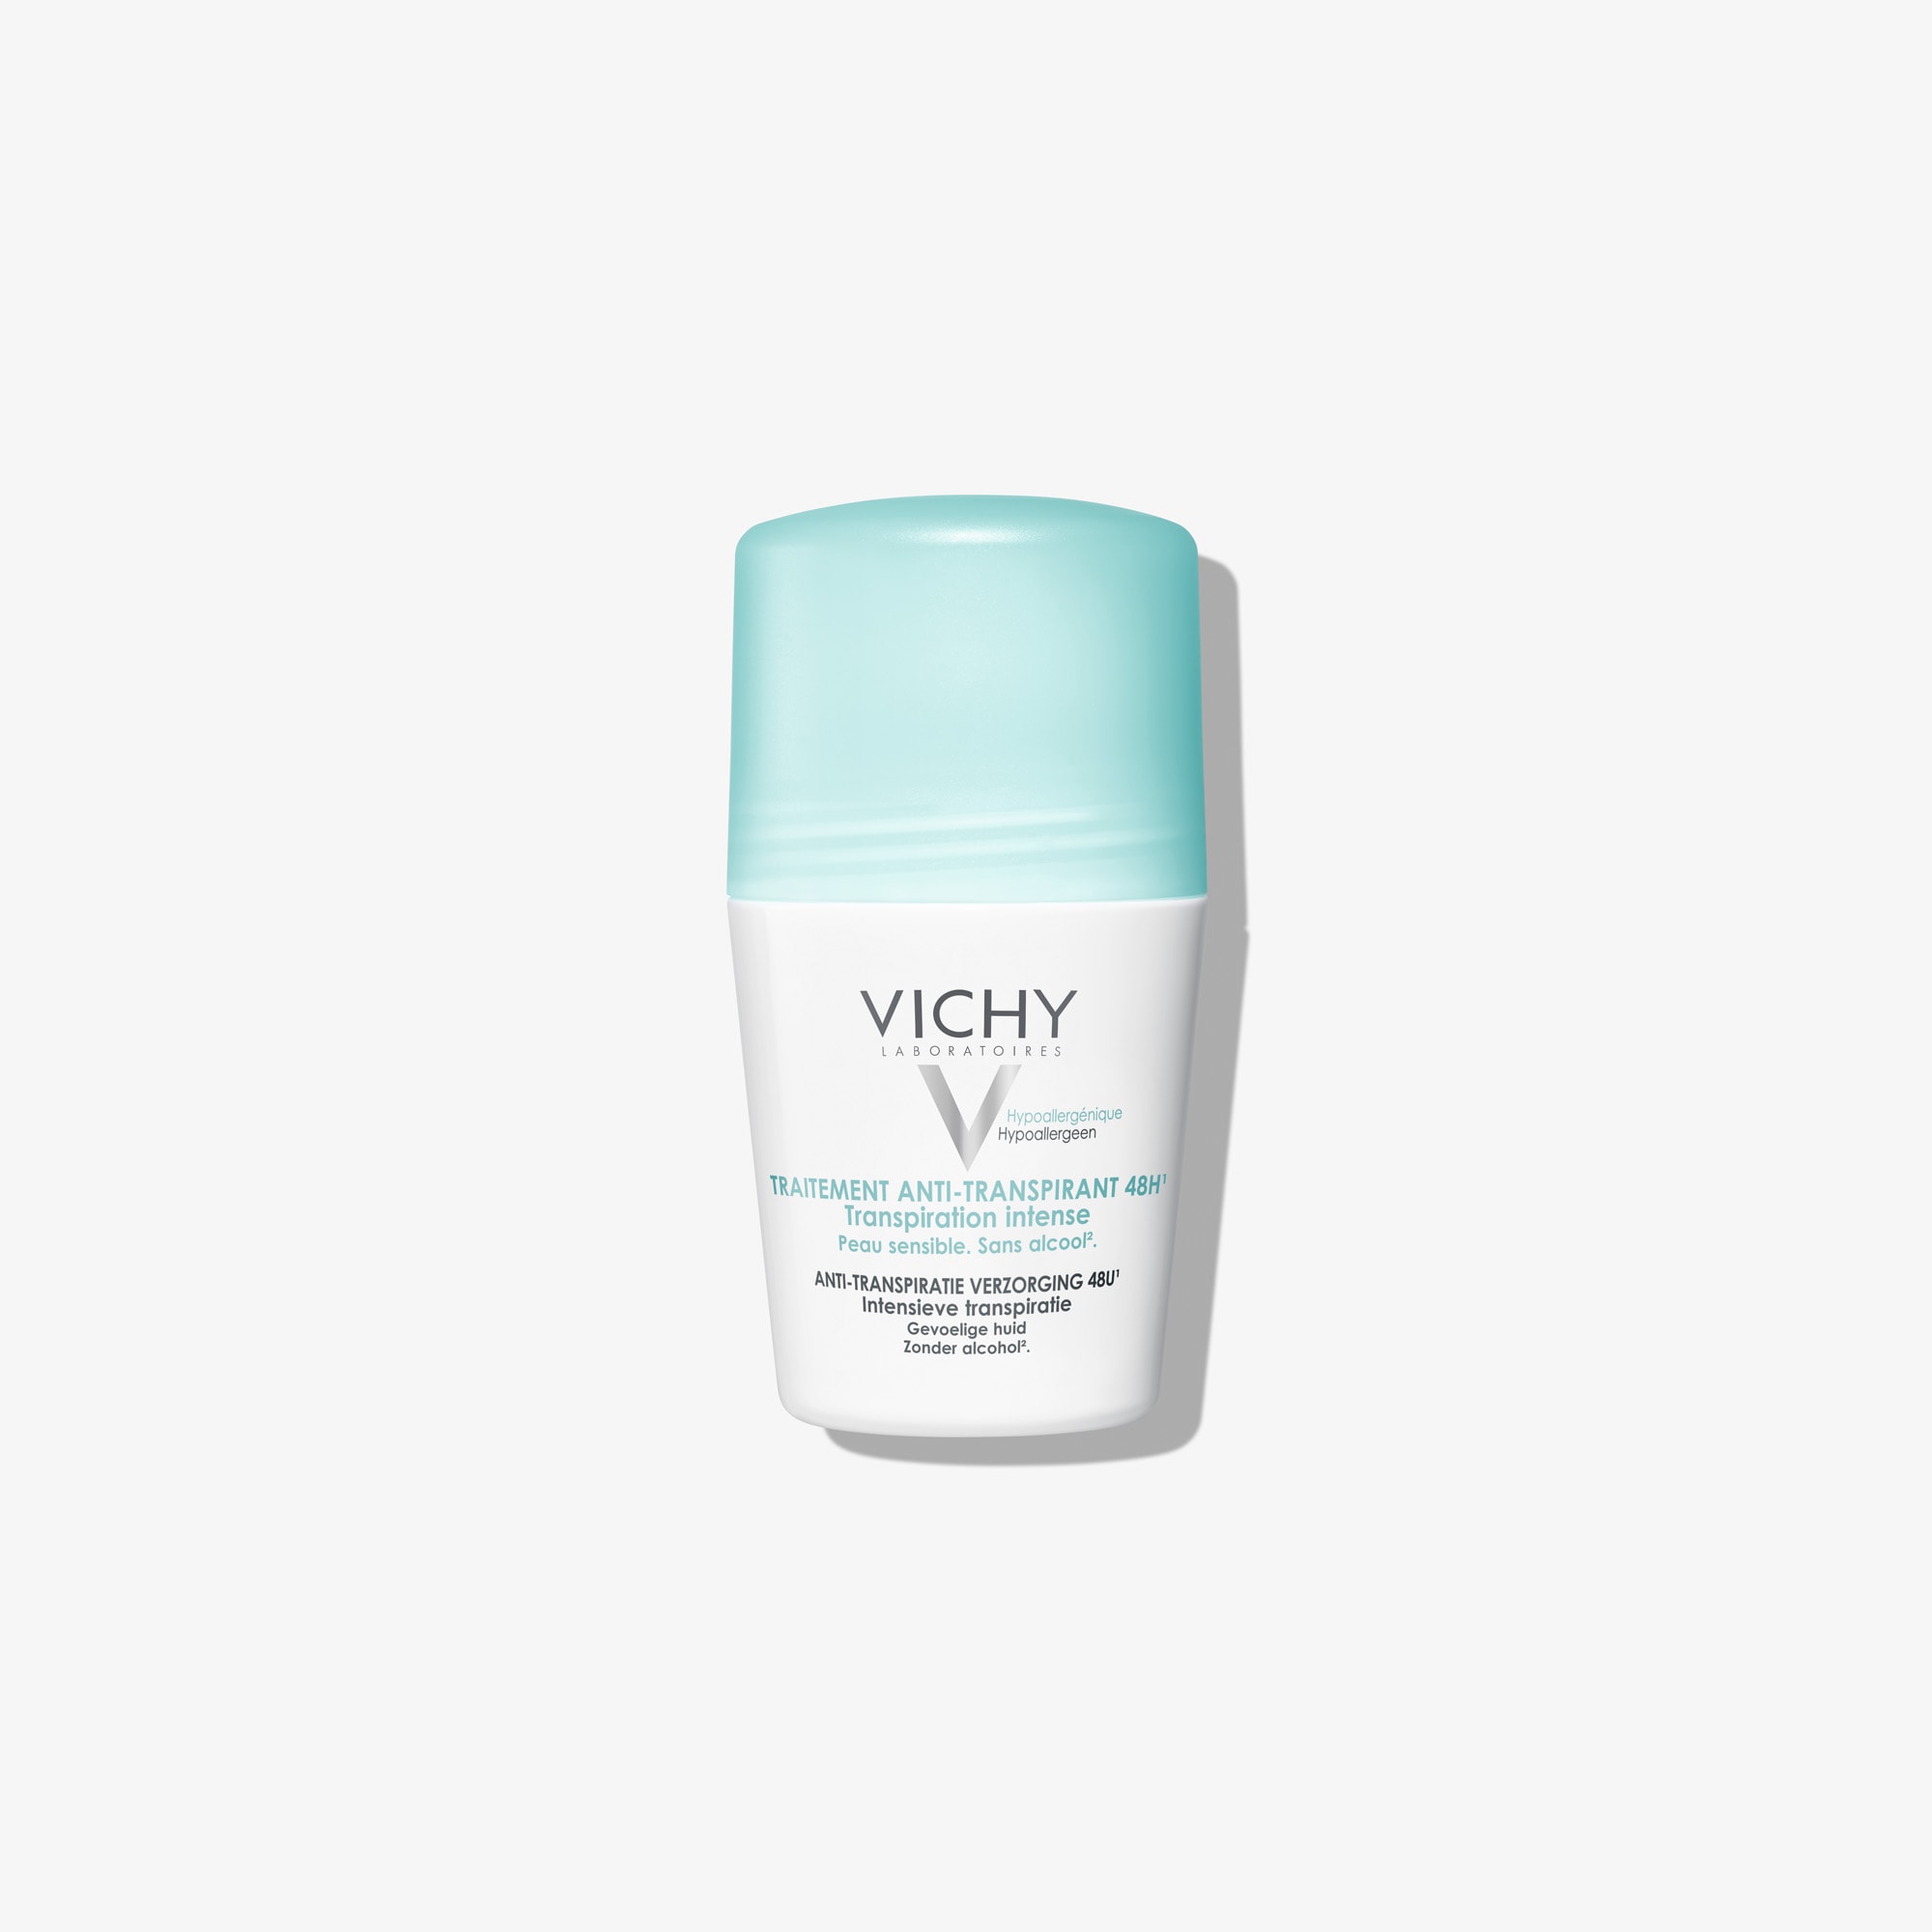 VIC_044_VICHY_DEO_48-hour Intensive Anti-Perspirant Treatment No Fragrance - Roll-on